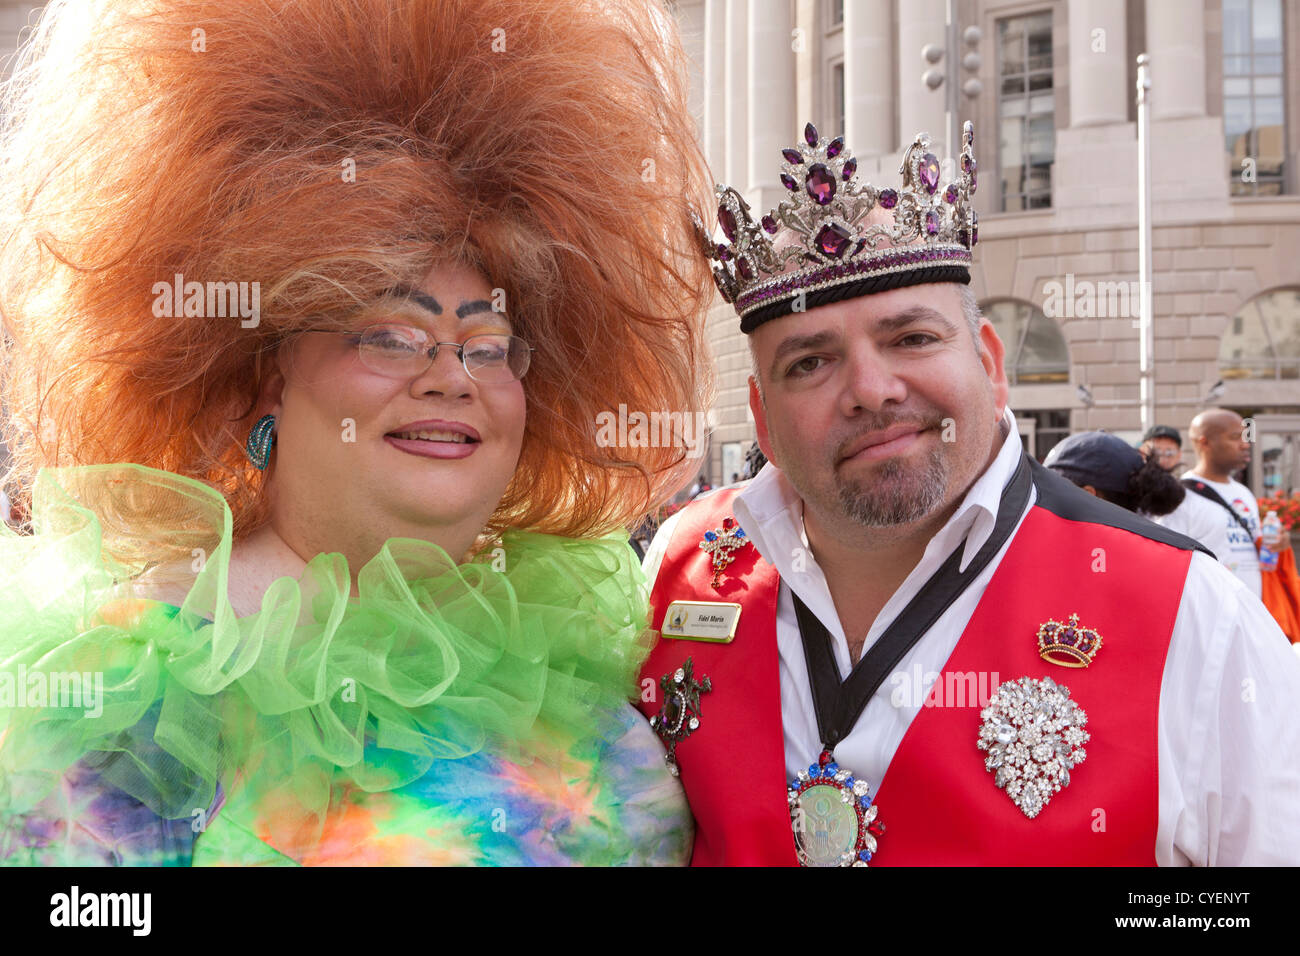 Drag queen with big hair - USA Stock Photo